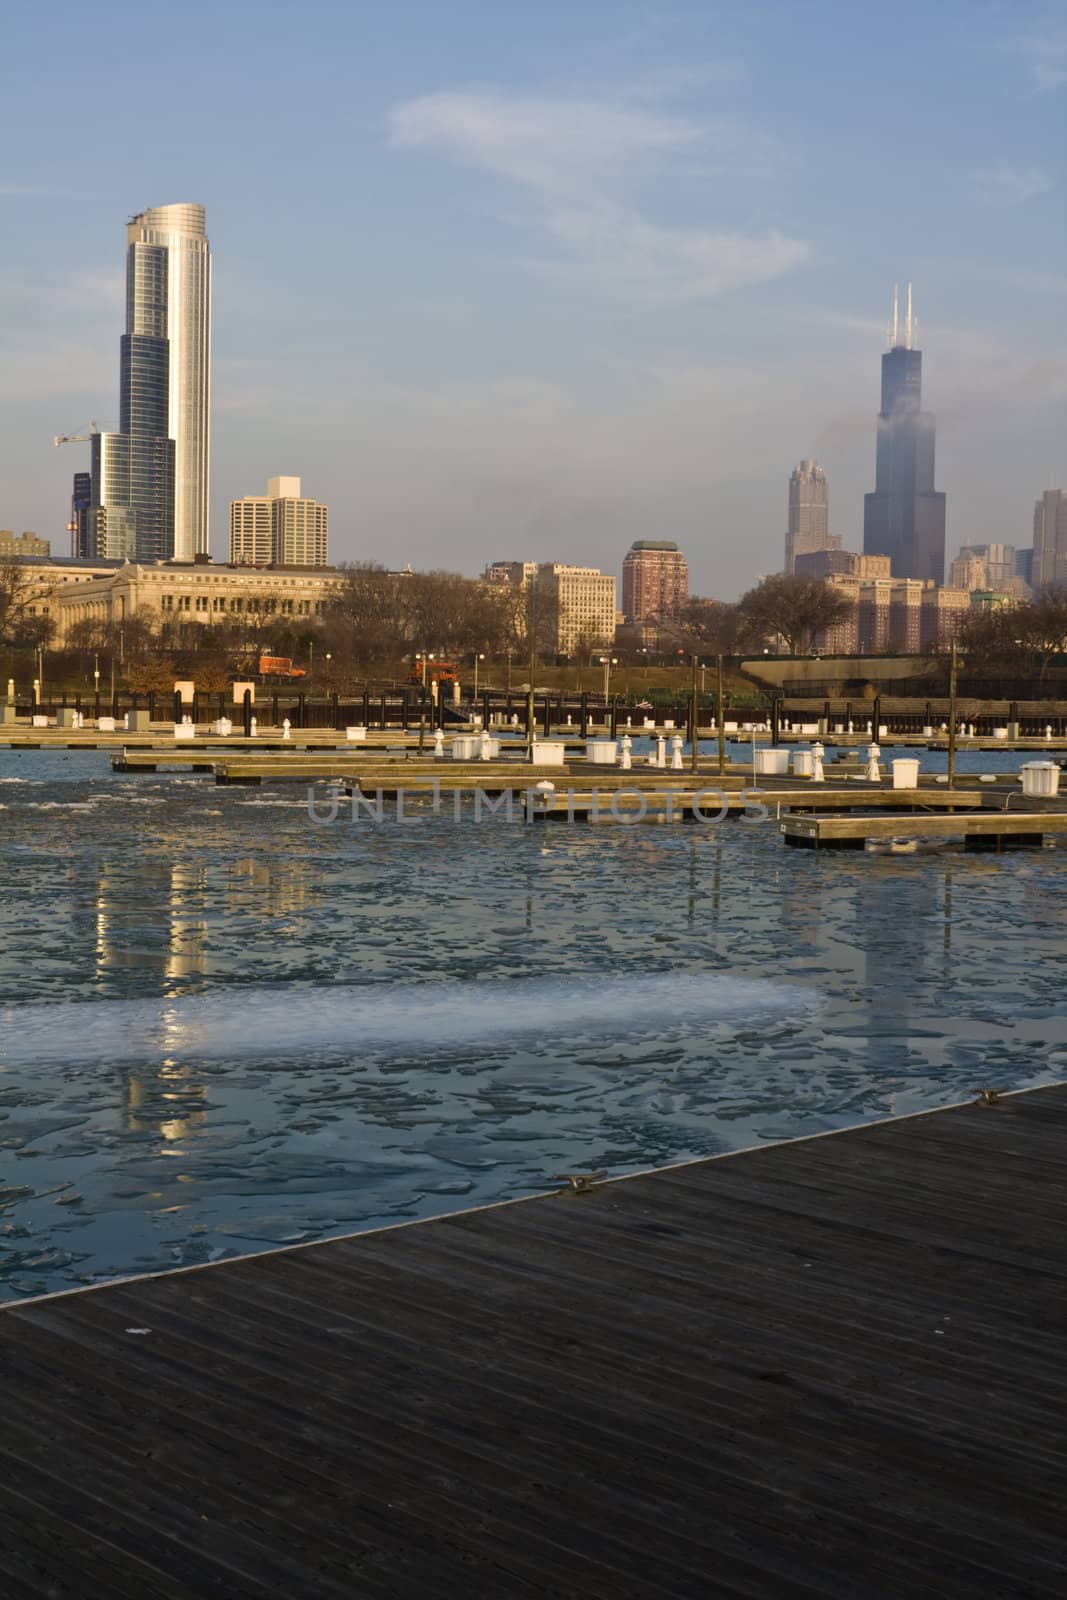 Winter morning in Chicago by benkrut